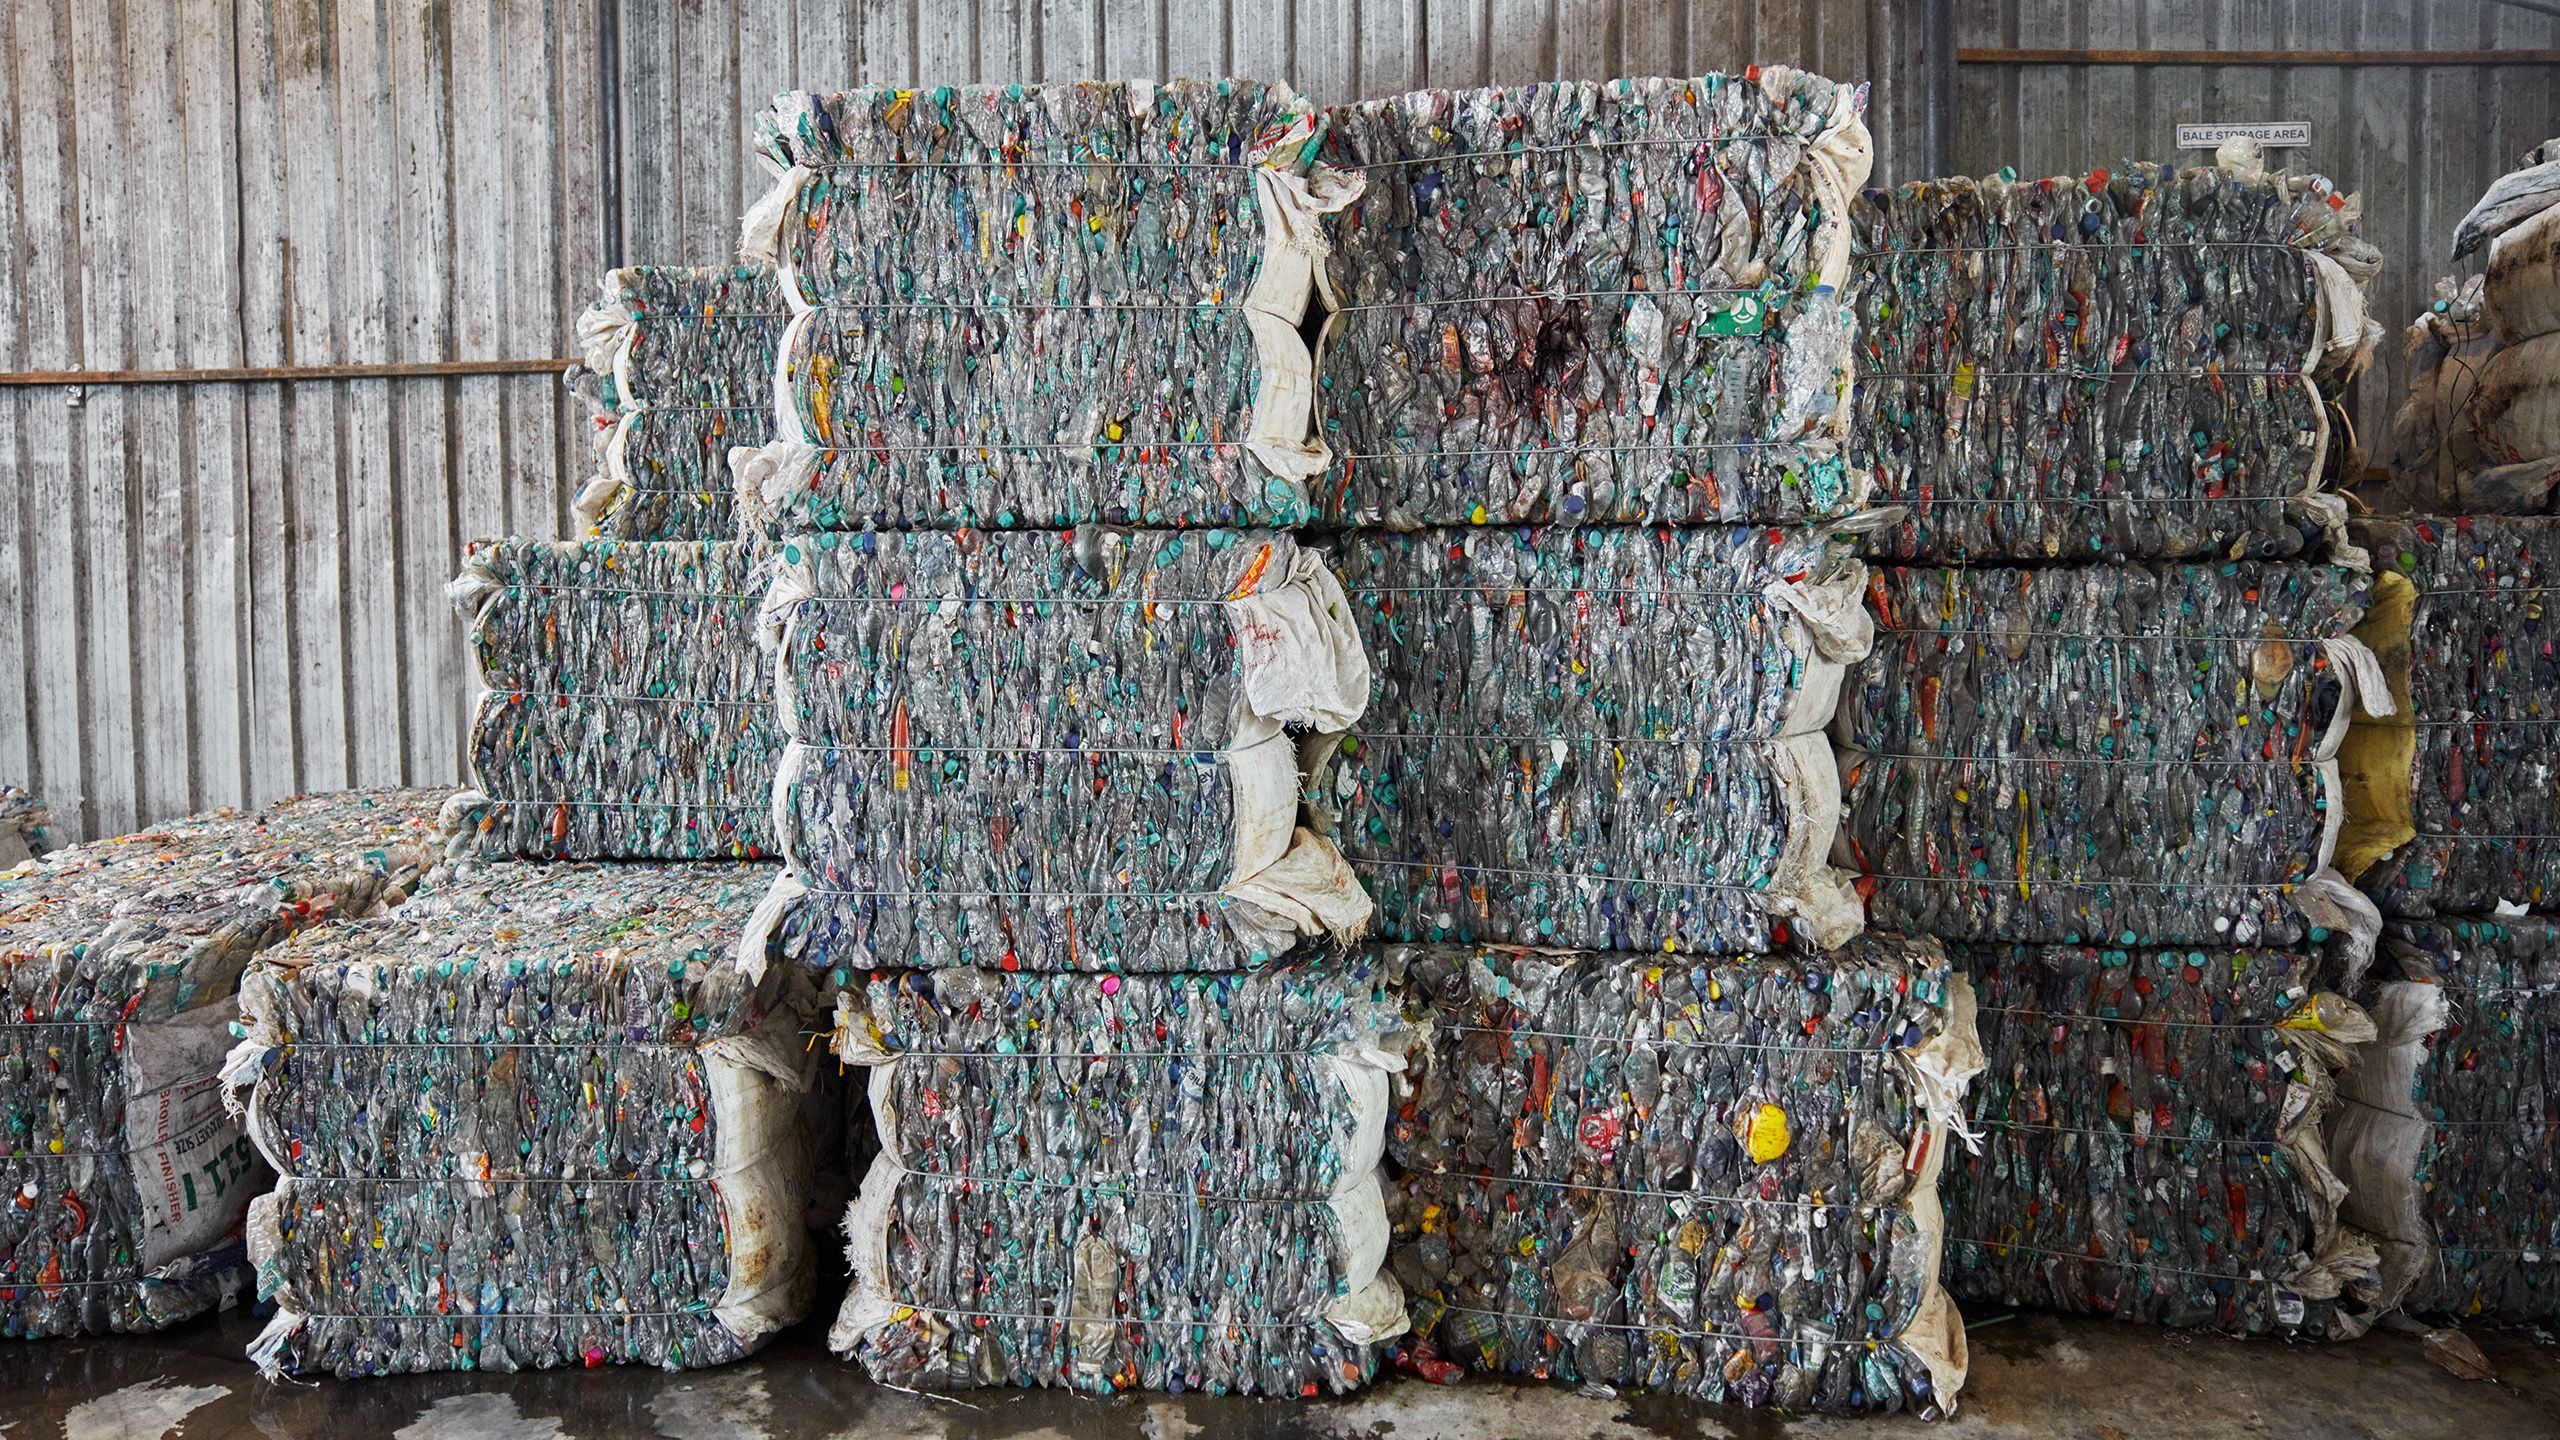 Giving power to waste pickers to boost the circular economy